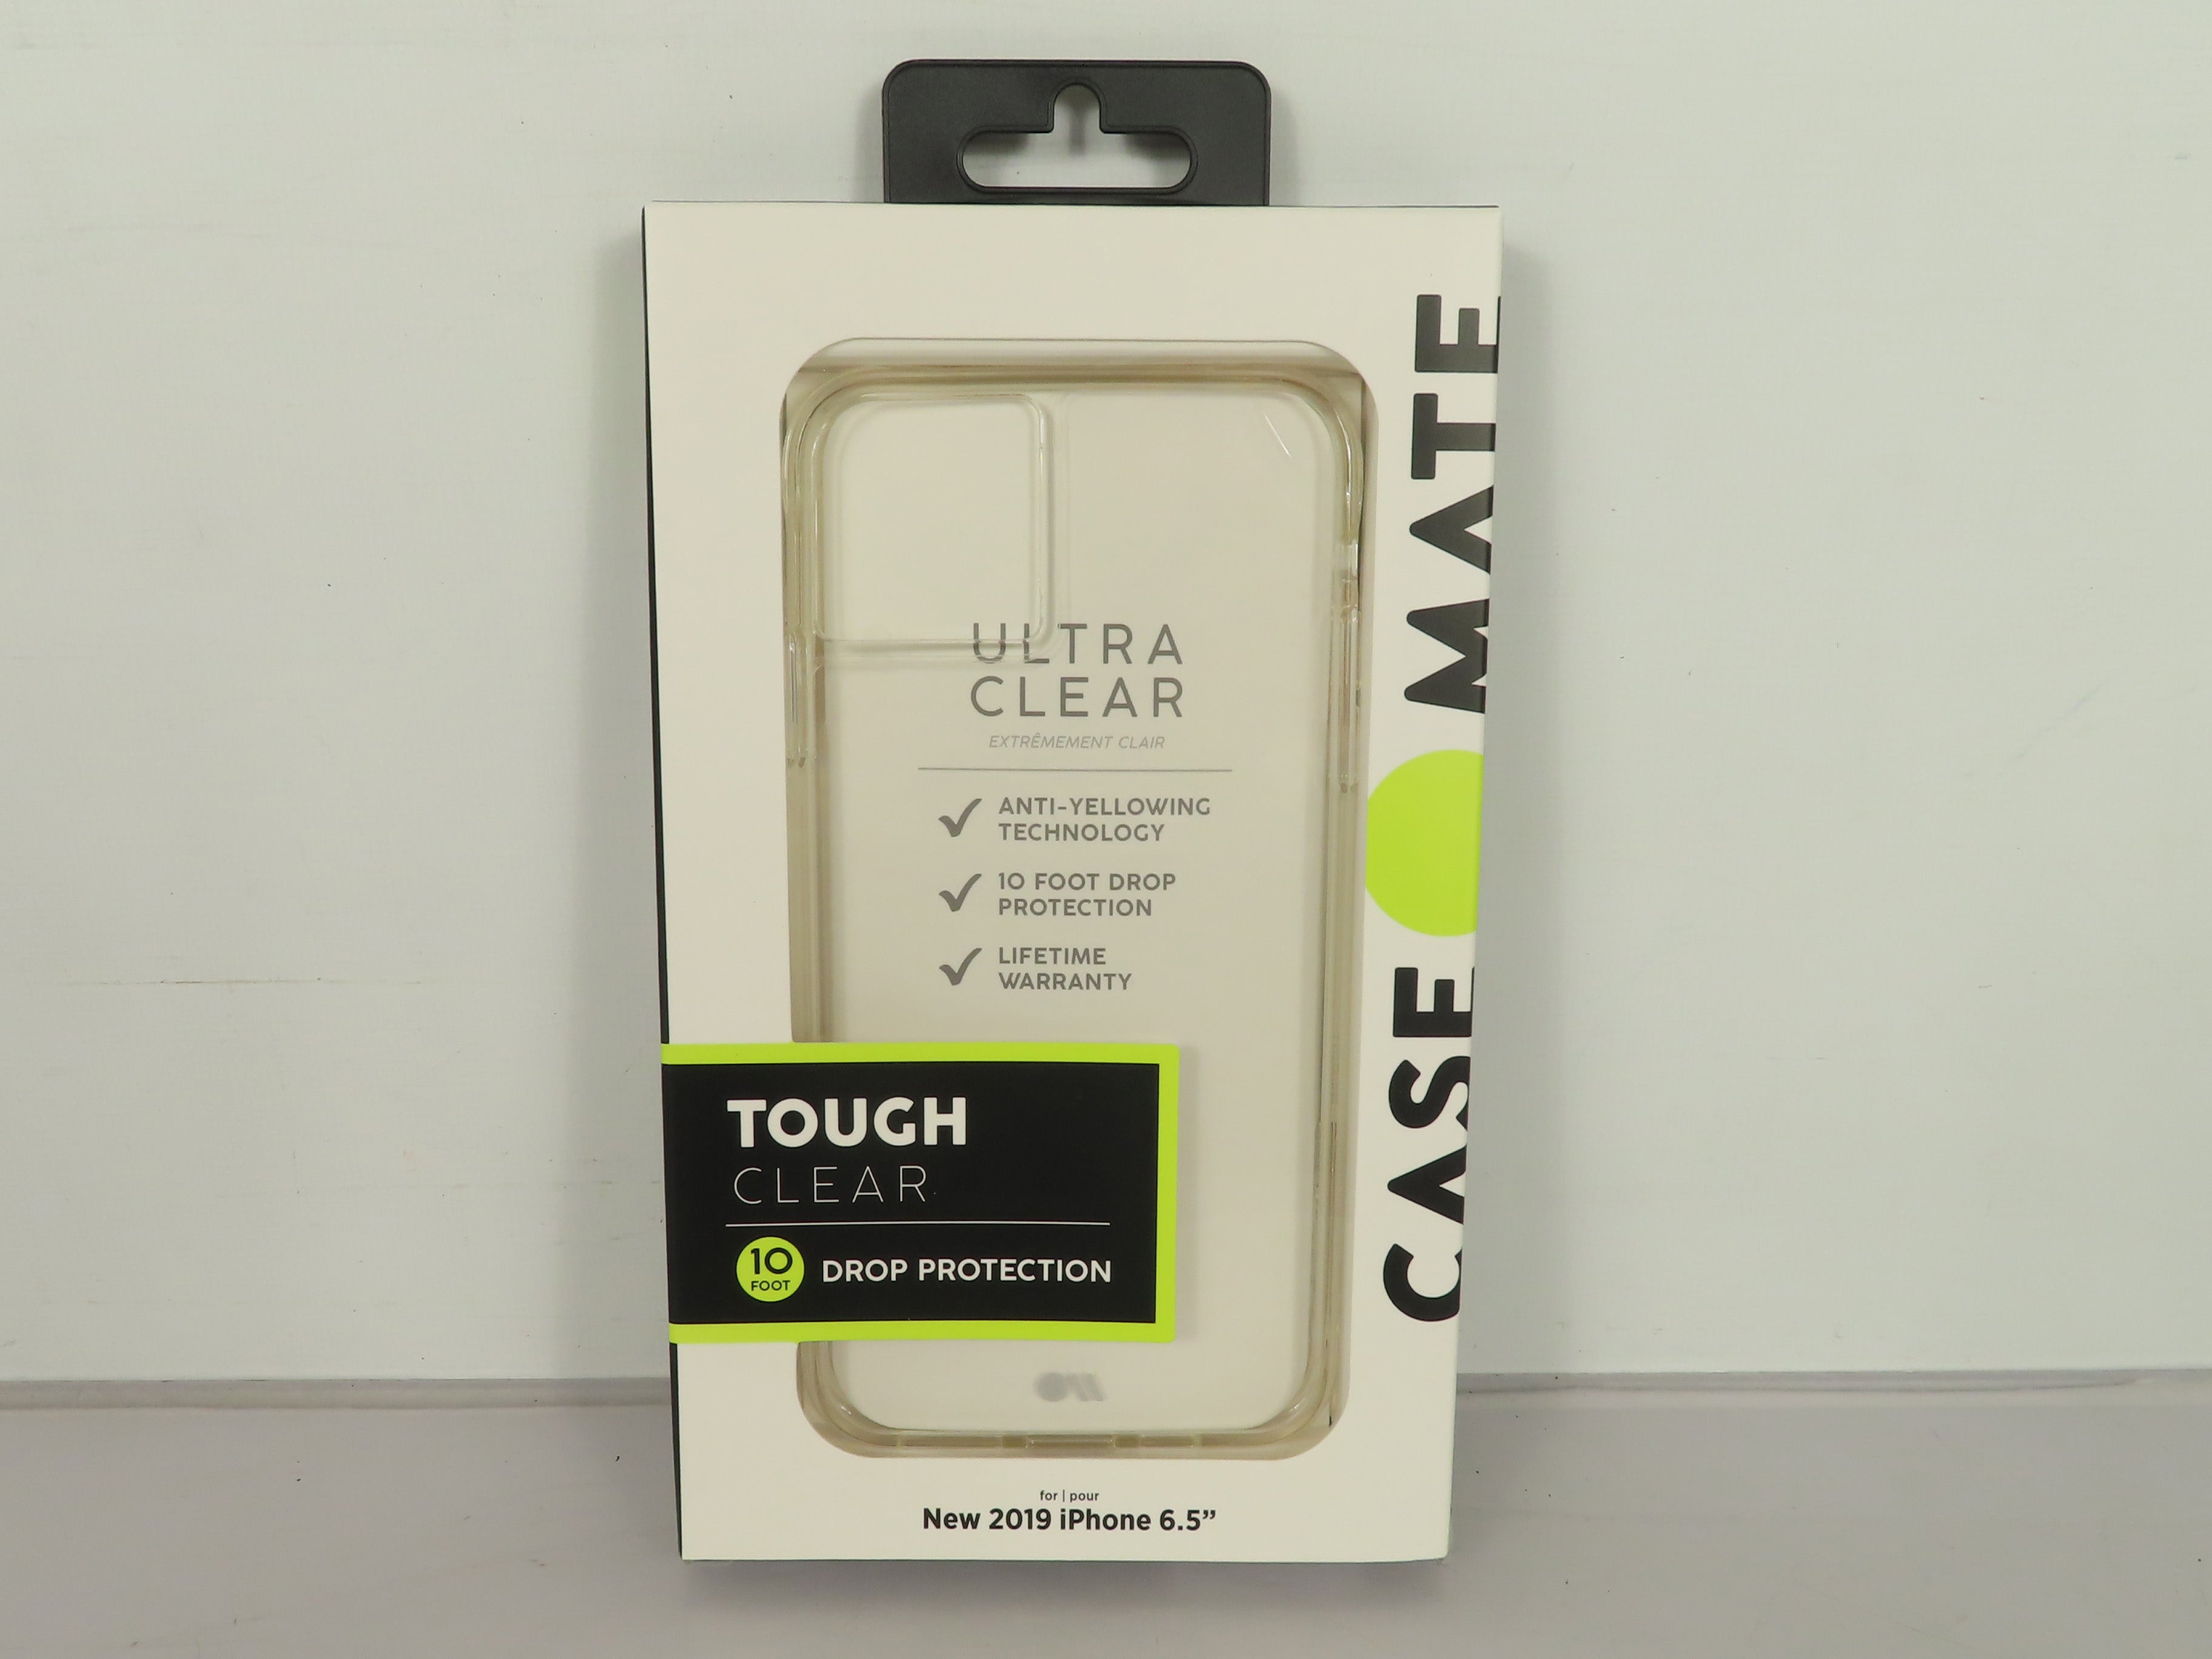 Case Mate Tough Clear Phone Case for iPhone XS Max/iPhone 11 Pro Max